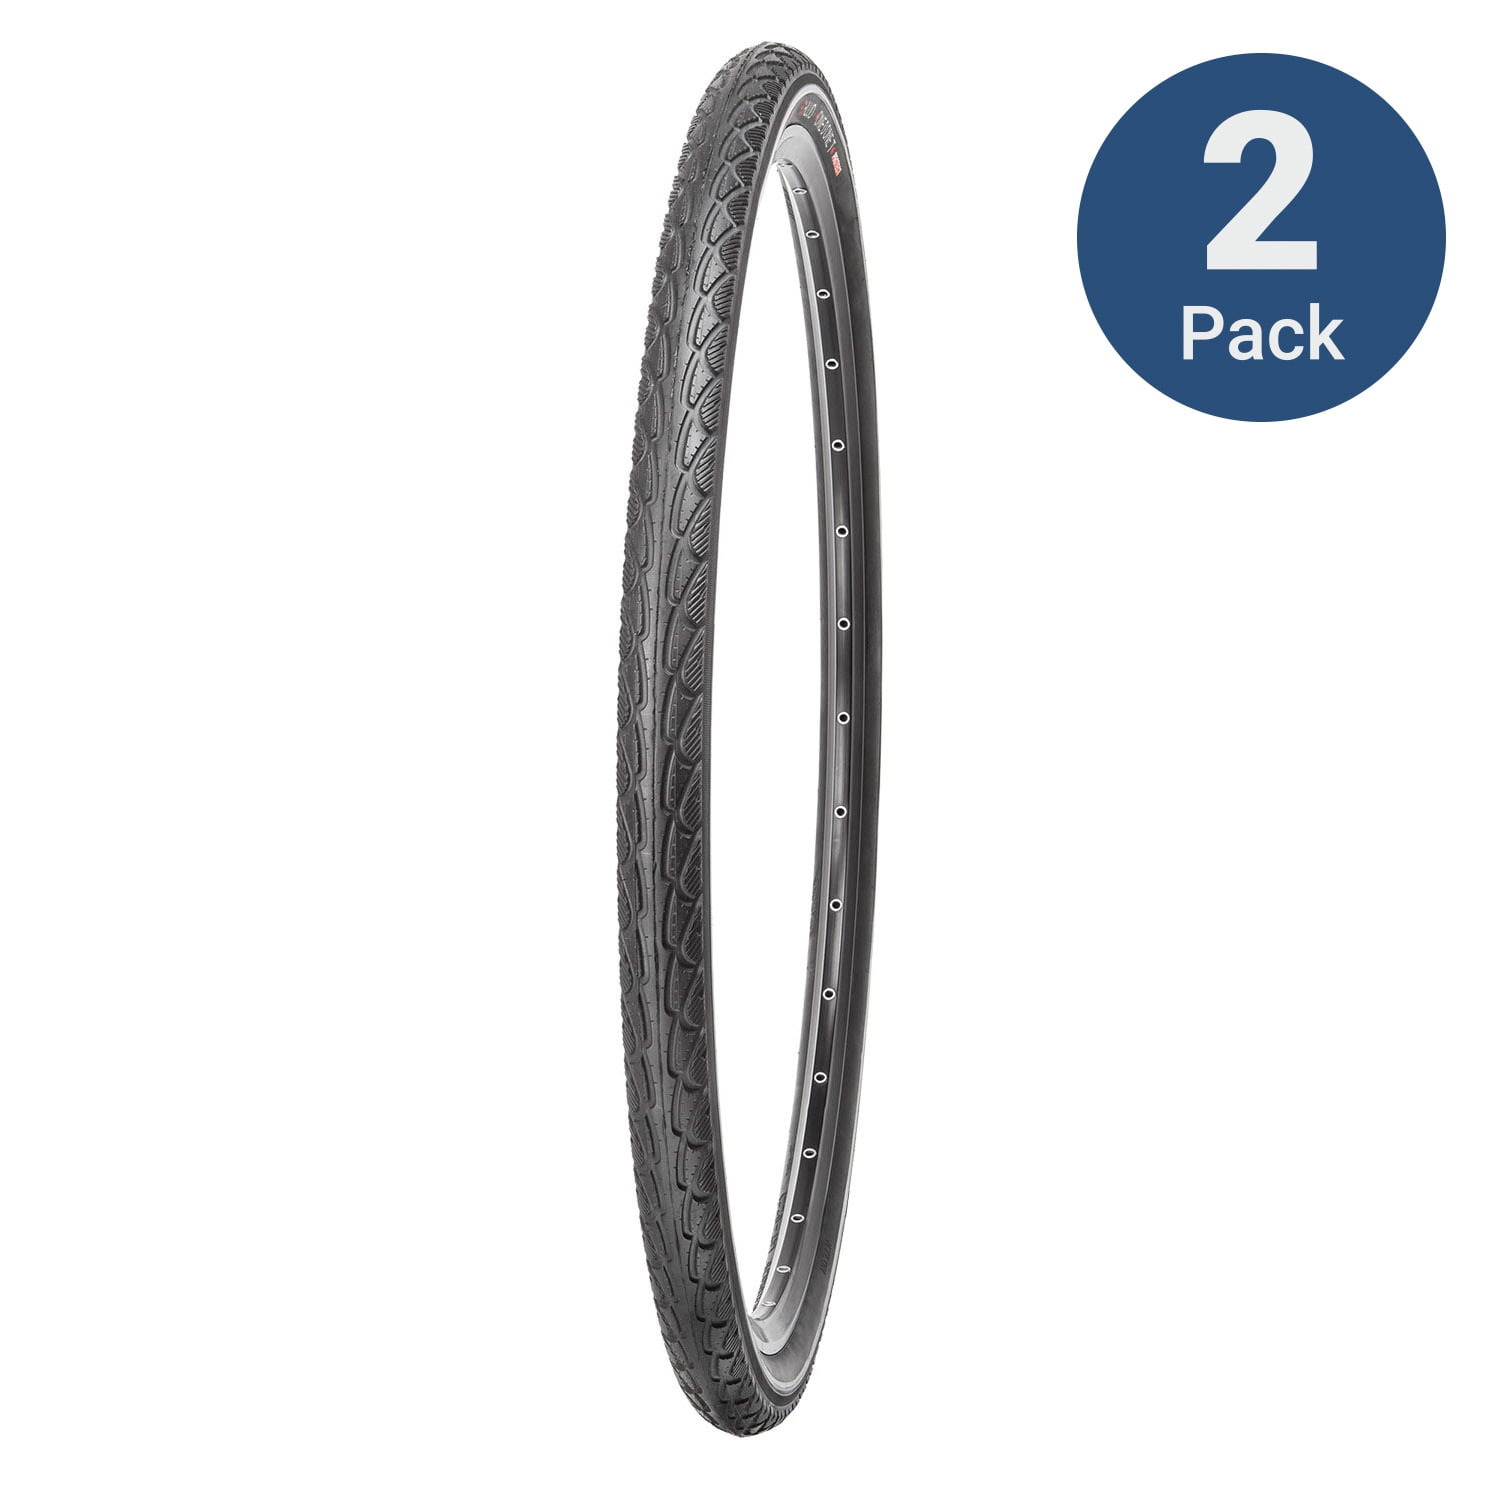 1 PAIR Road Bike Tyre tyres 700c x 28 Raleigh T1240 With 3 choice of tubes 